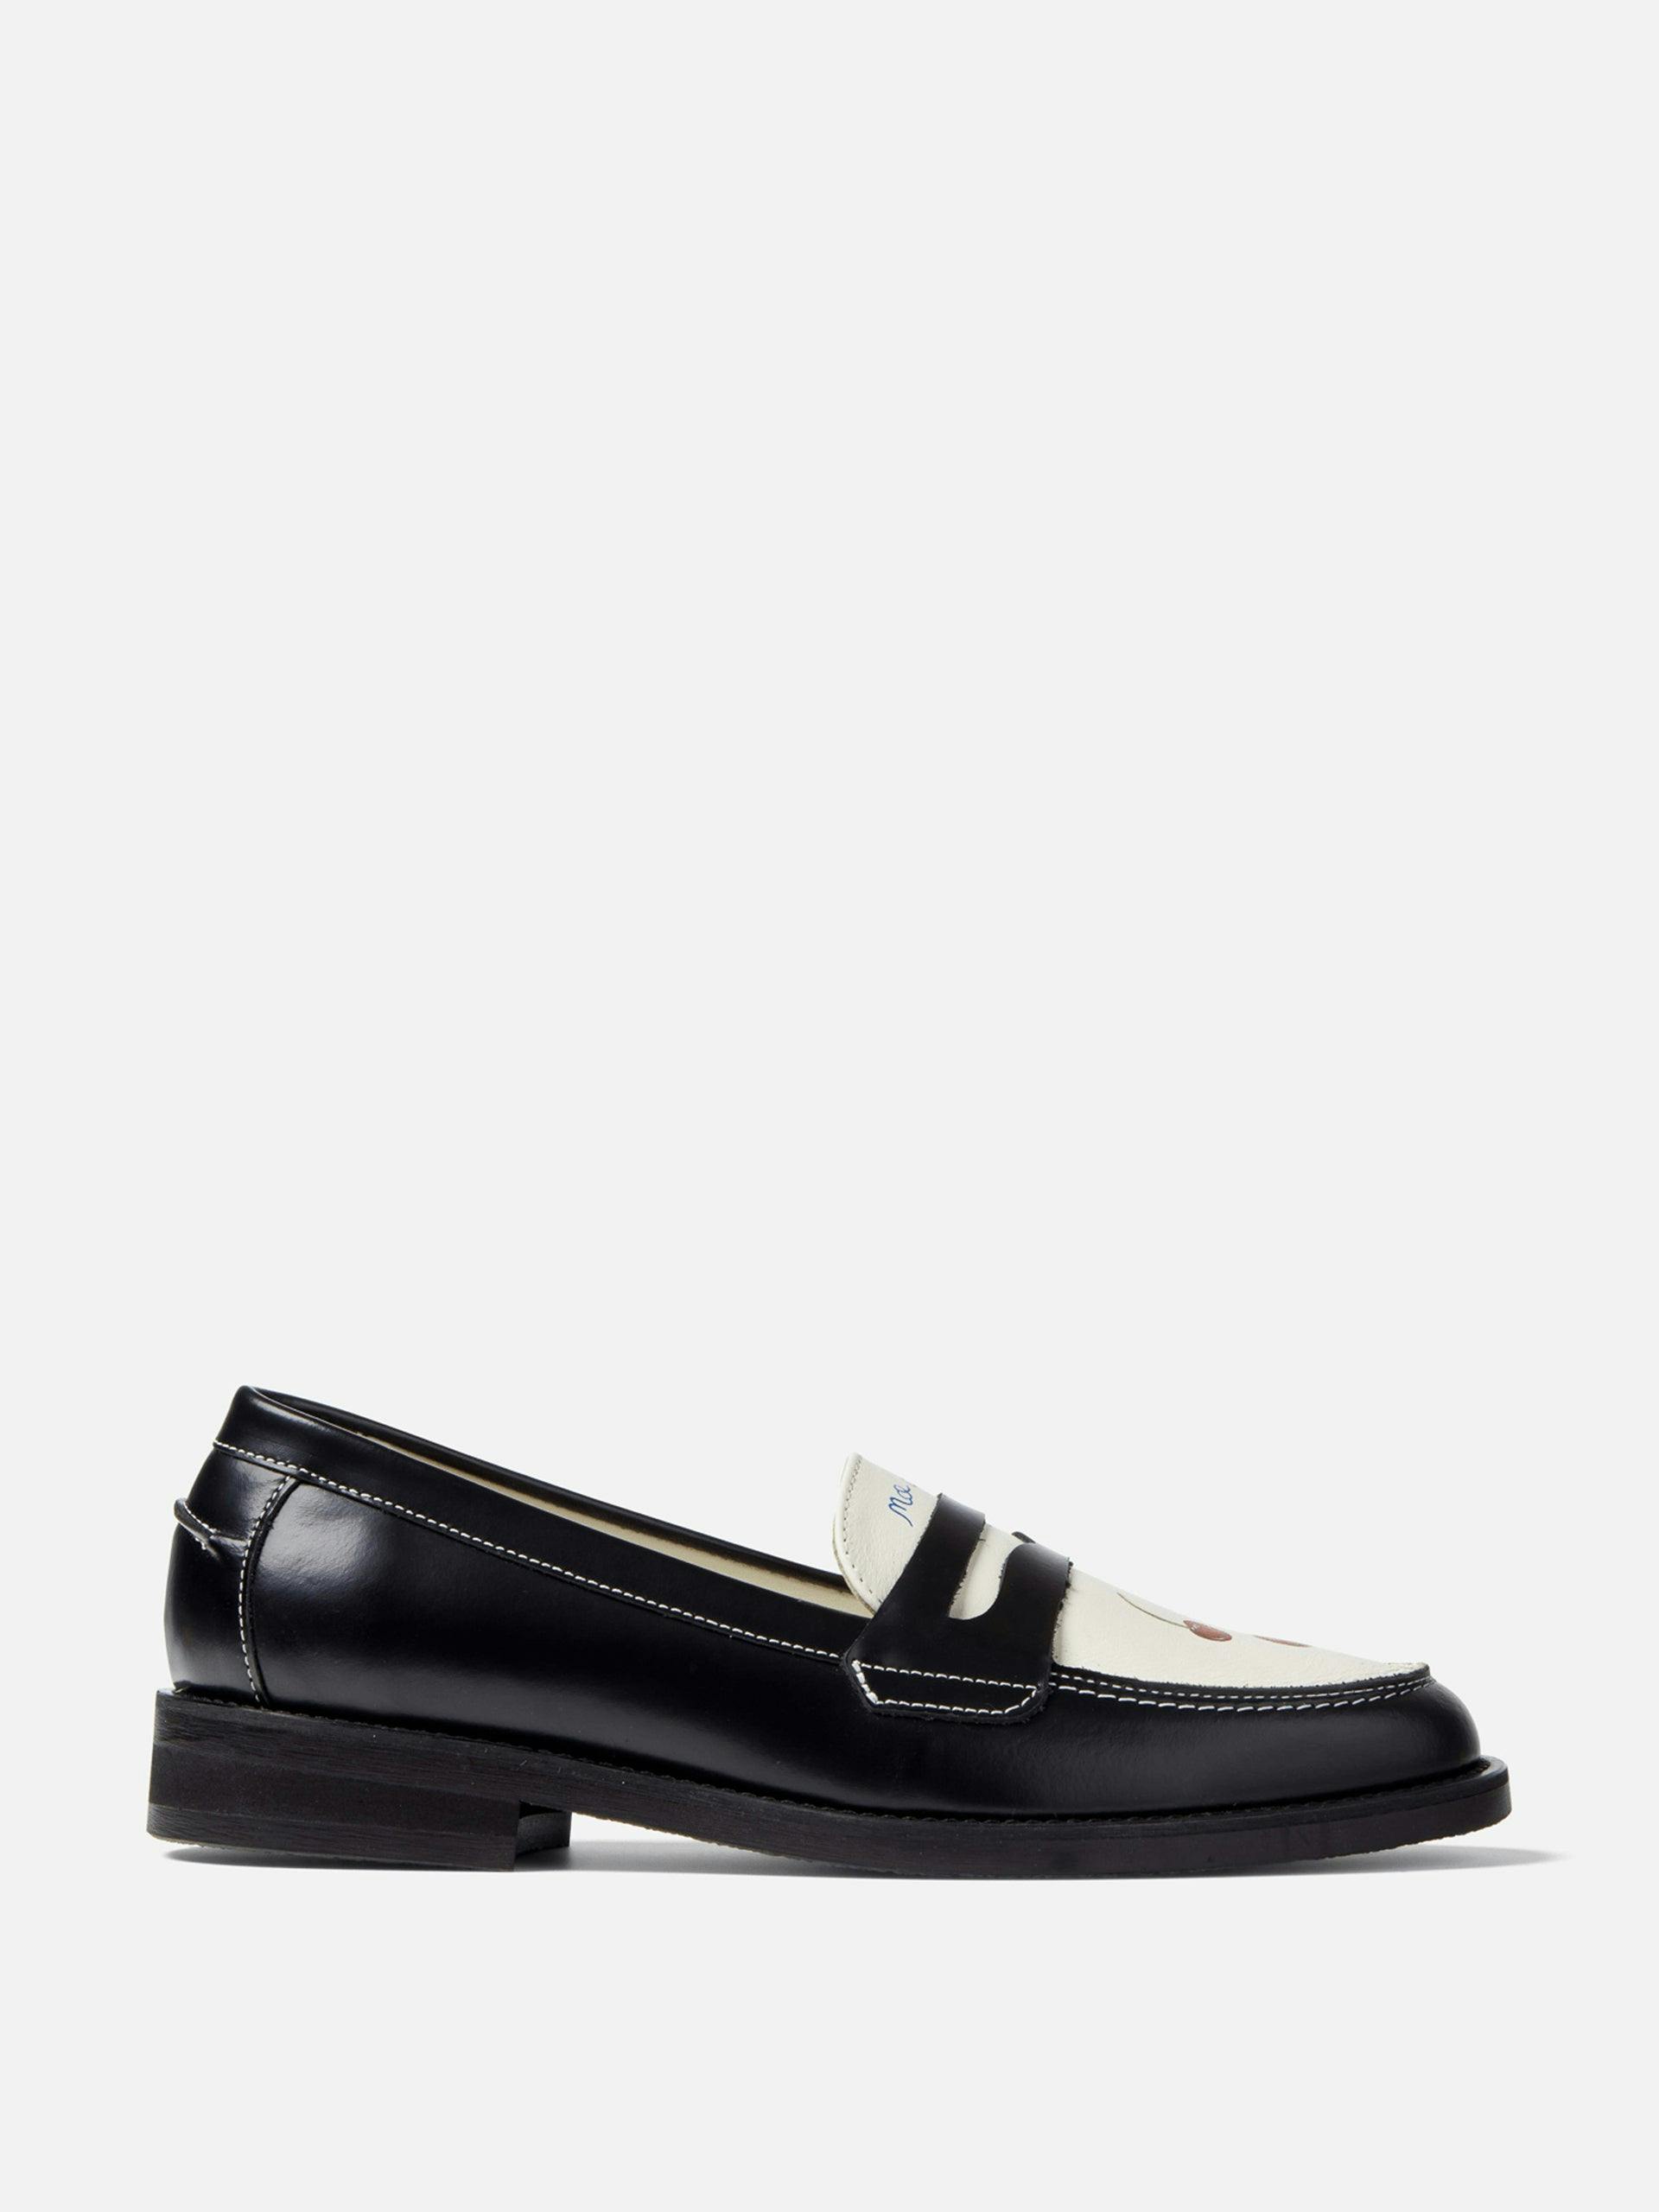 Cherry penny loafers